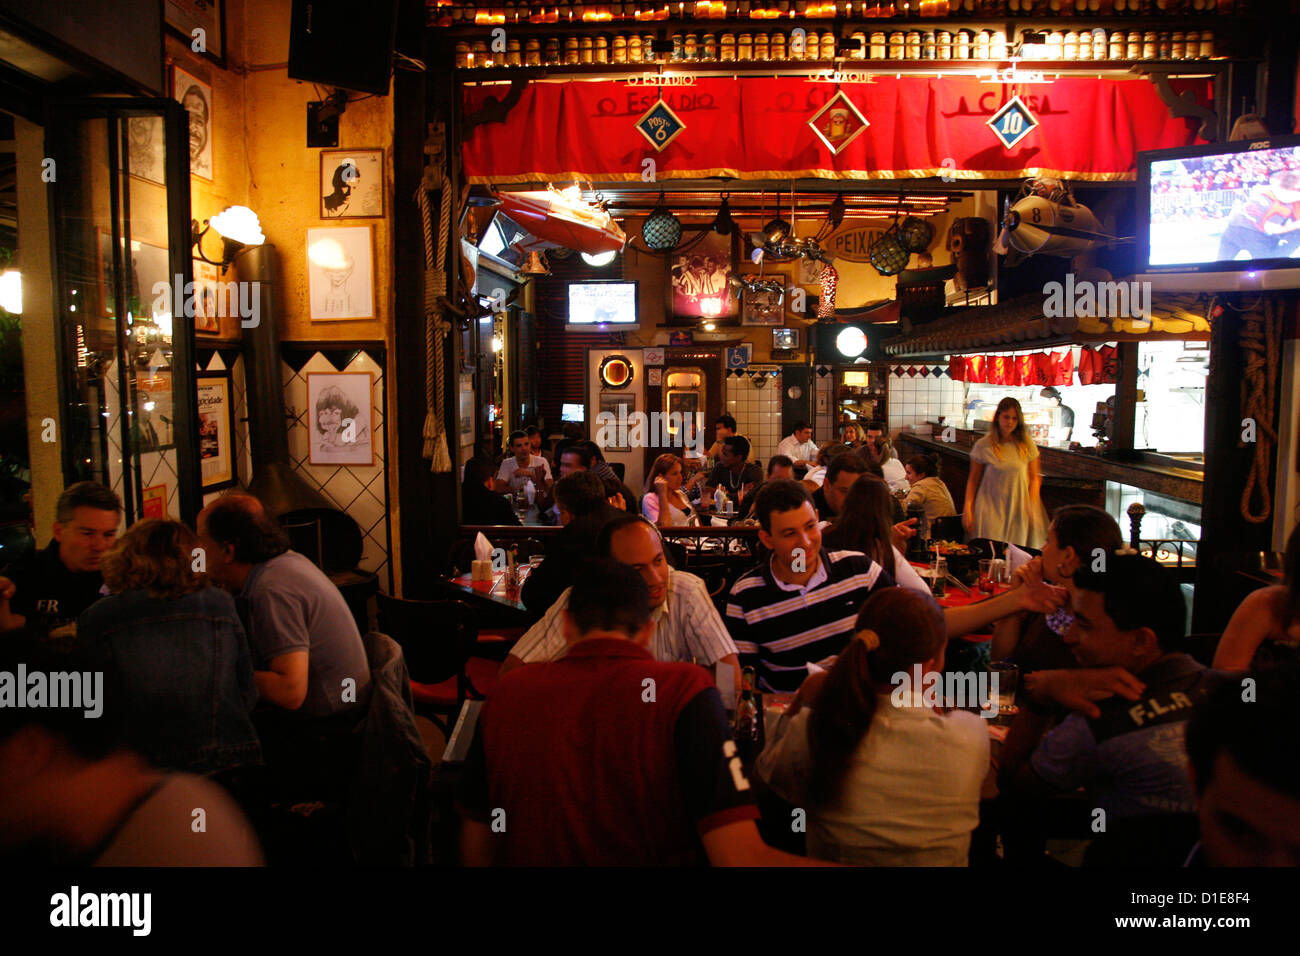 People in a restaurant in the Vila Madalena area known for its bars, restaurants and nighlife, Sao Paulo, Brazil, South America Stock Photo